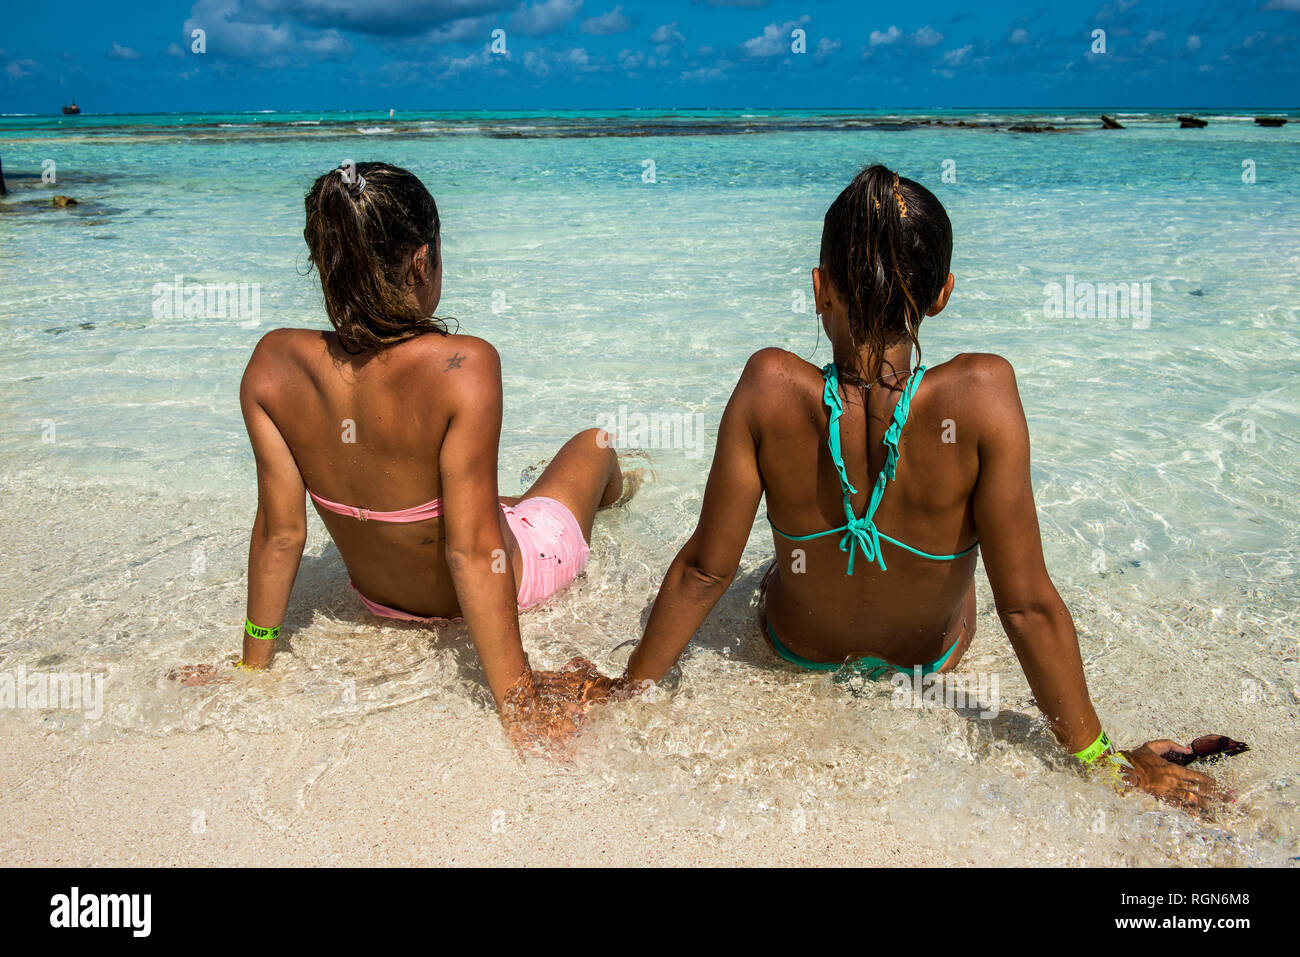 Carribean, Colombia, San Andres, El Acuario, rear view of two women sitting in shallow water Stock Photo